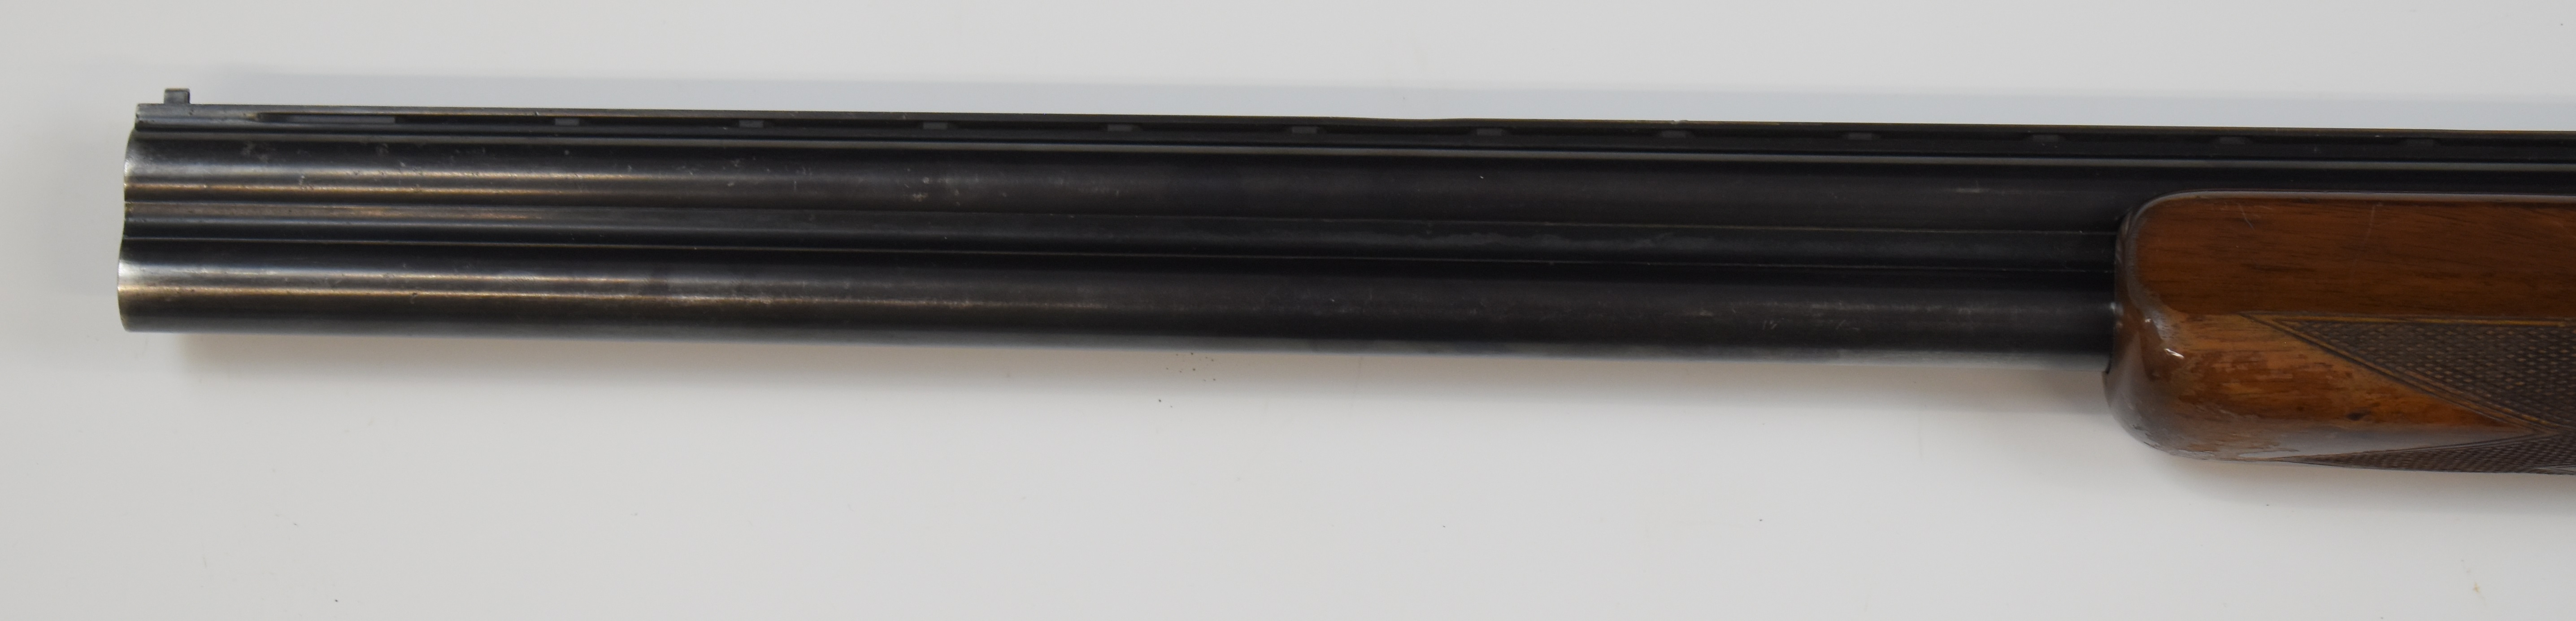 Browning Citori 12 bore over and under ejector shotgun with named underside, chequered semi-pistol - Image 9 of 10